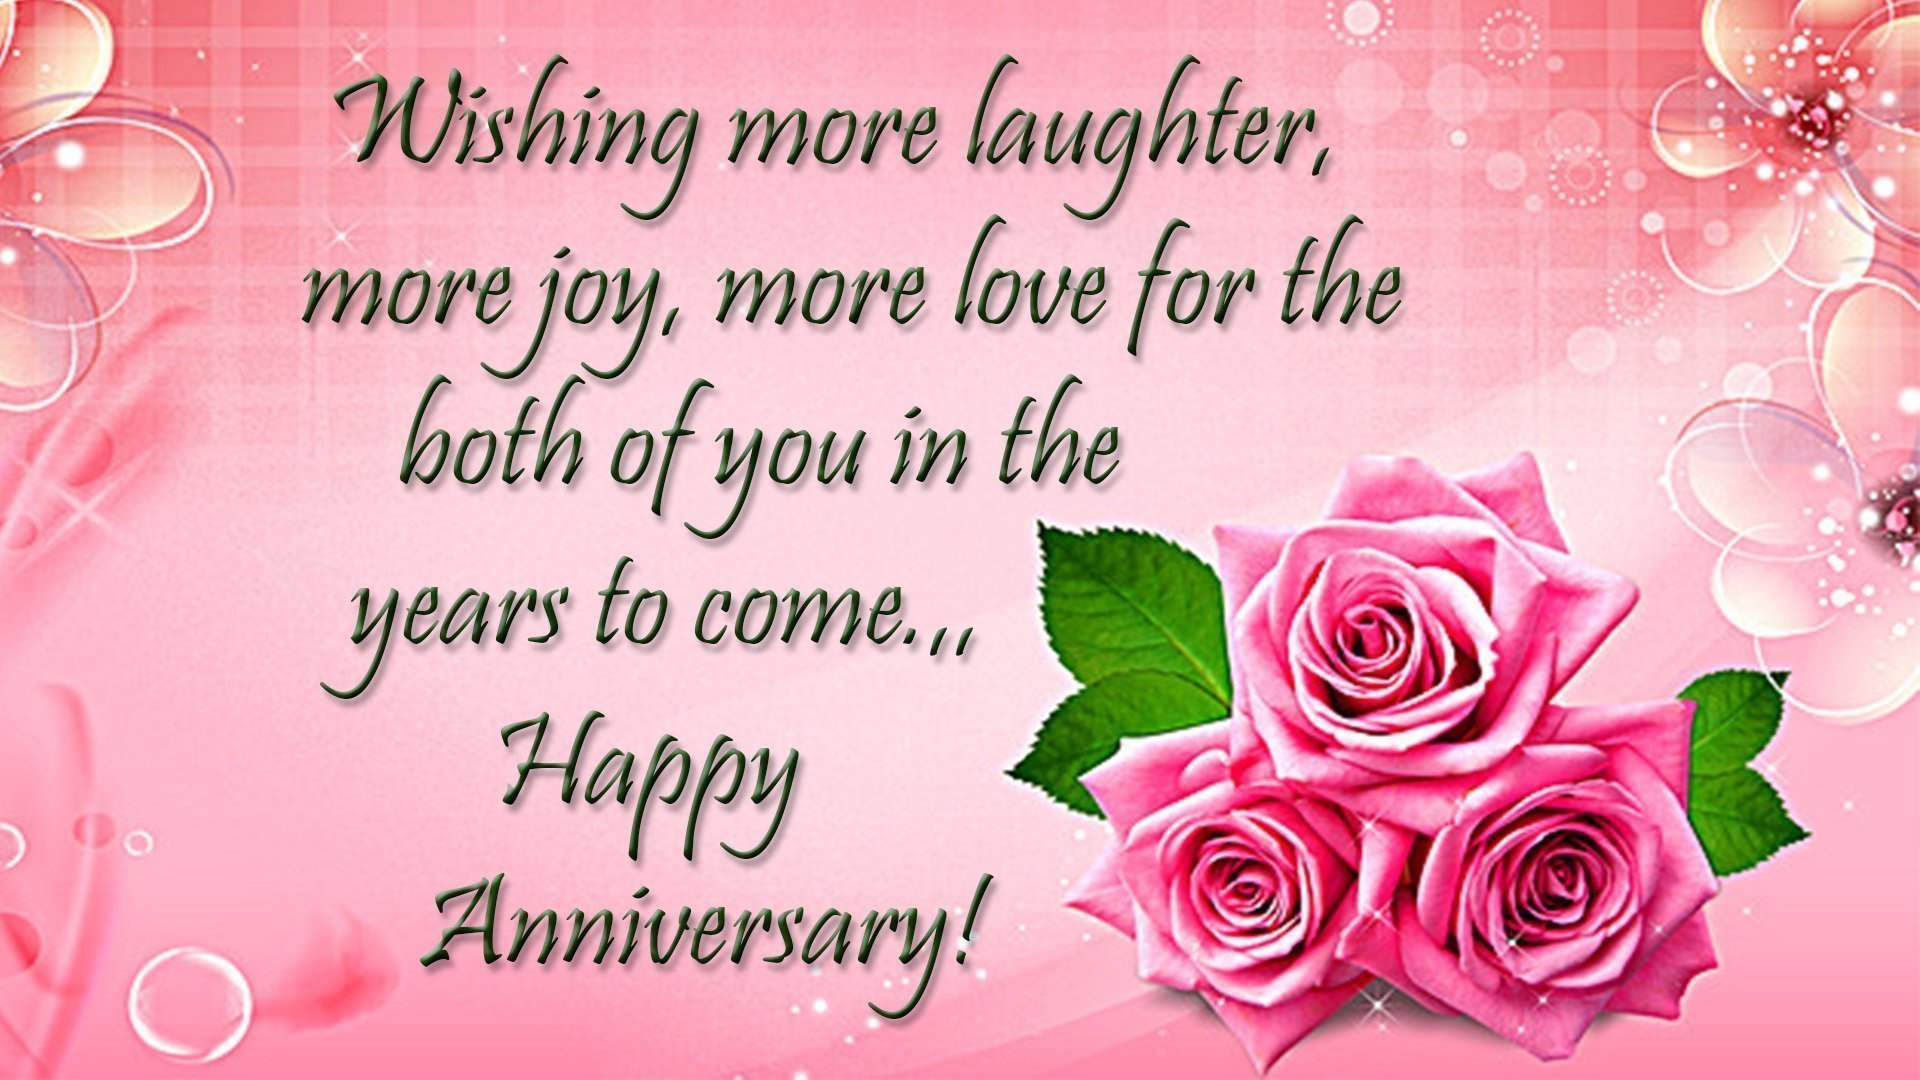 Wedding Anniversary Messages Wishes And Quotes - vrogue.co